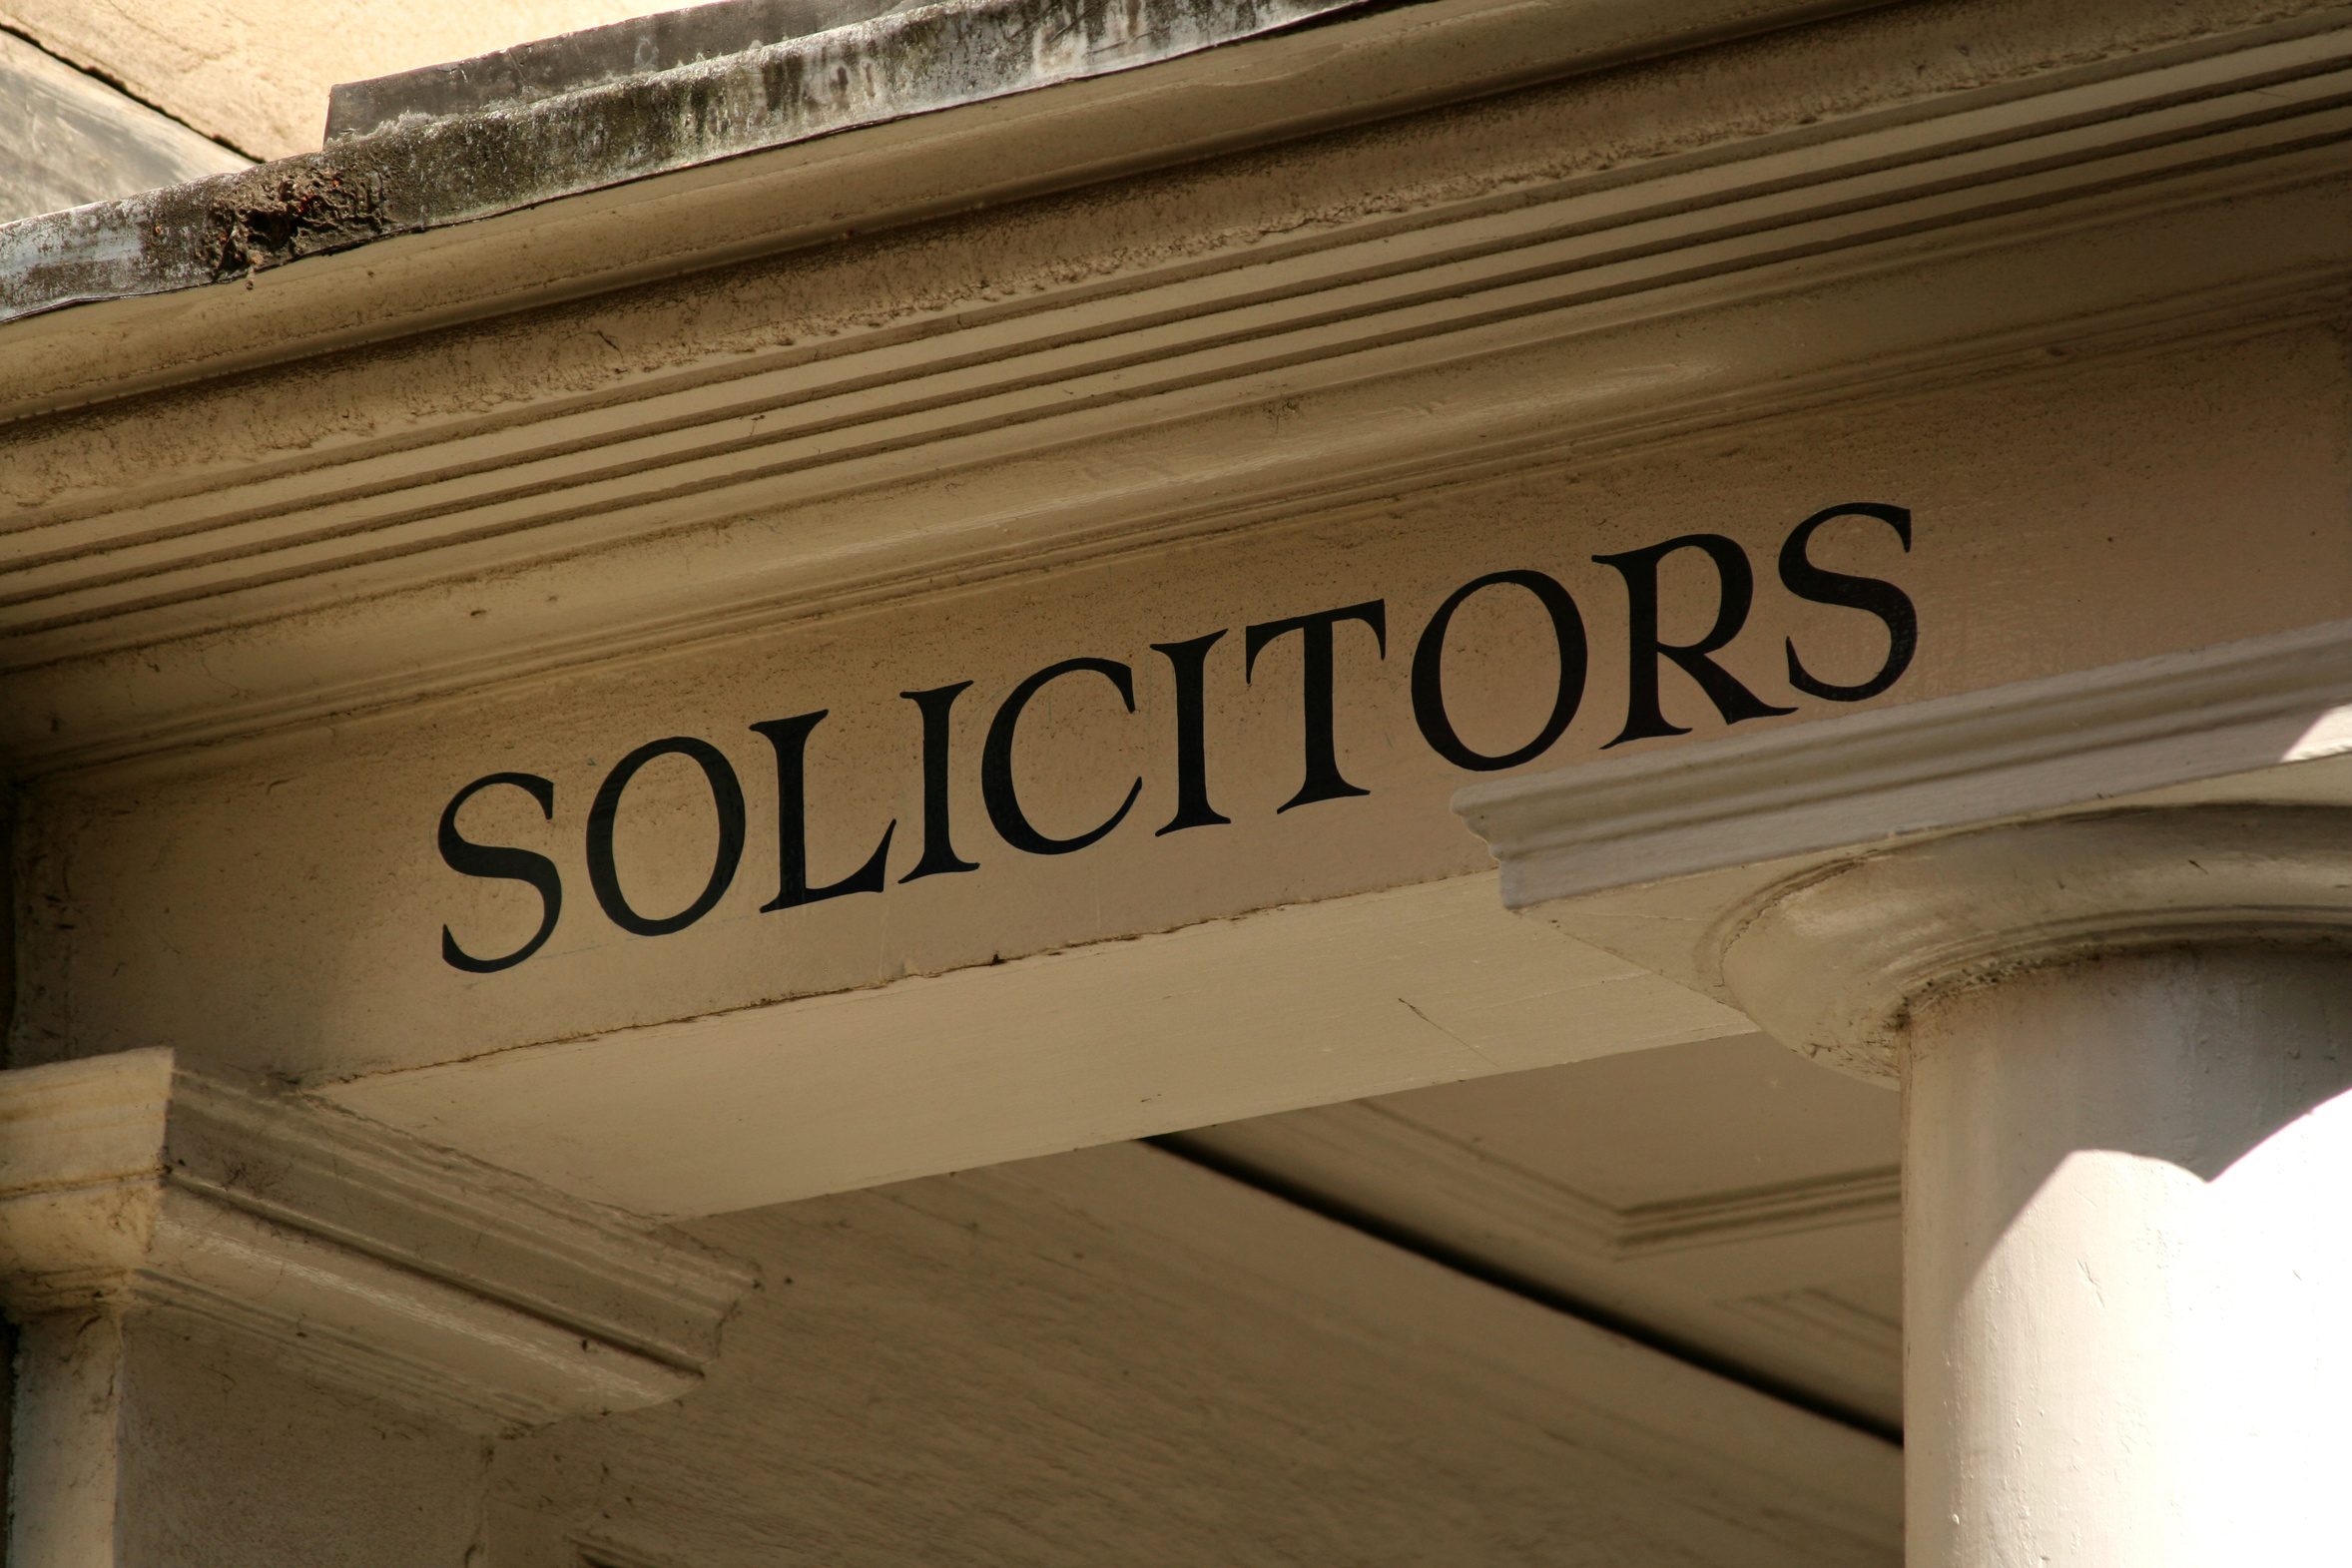 Manchester solicitor suspended for paying referral fees